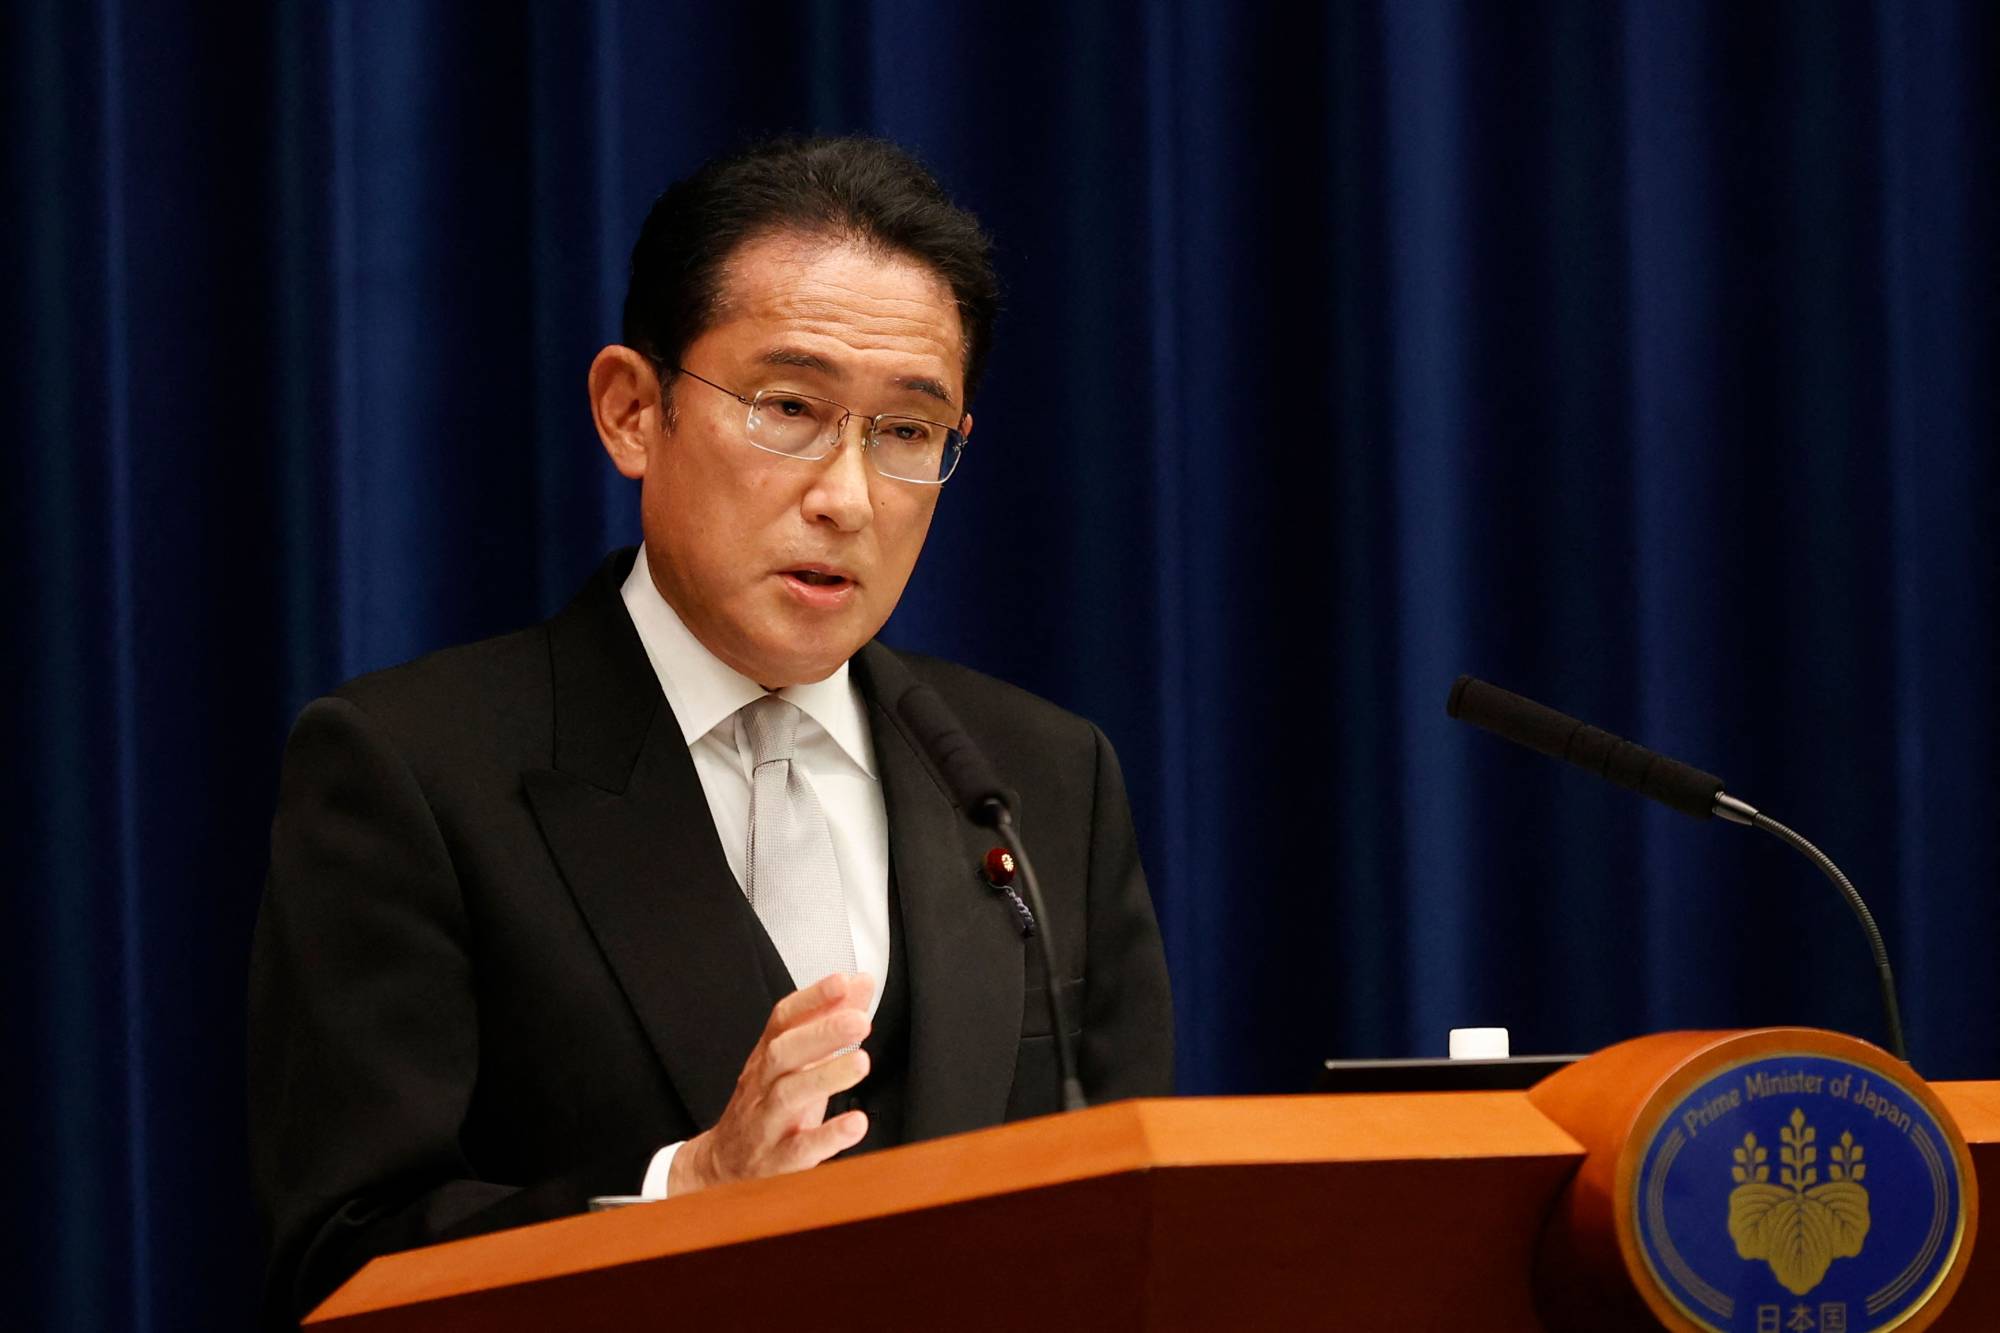 Japanese PM Fumio Kishida pledged over $30 billion in aid and investment to Africa at the Tokyo International Conference on African Development in Tunis on Sunday.